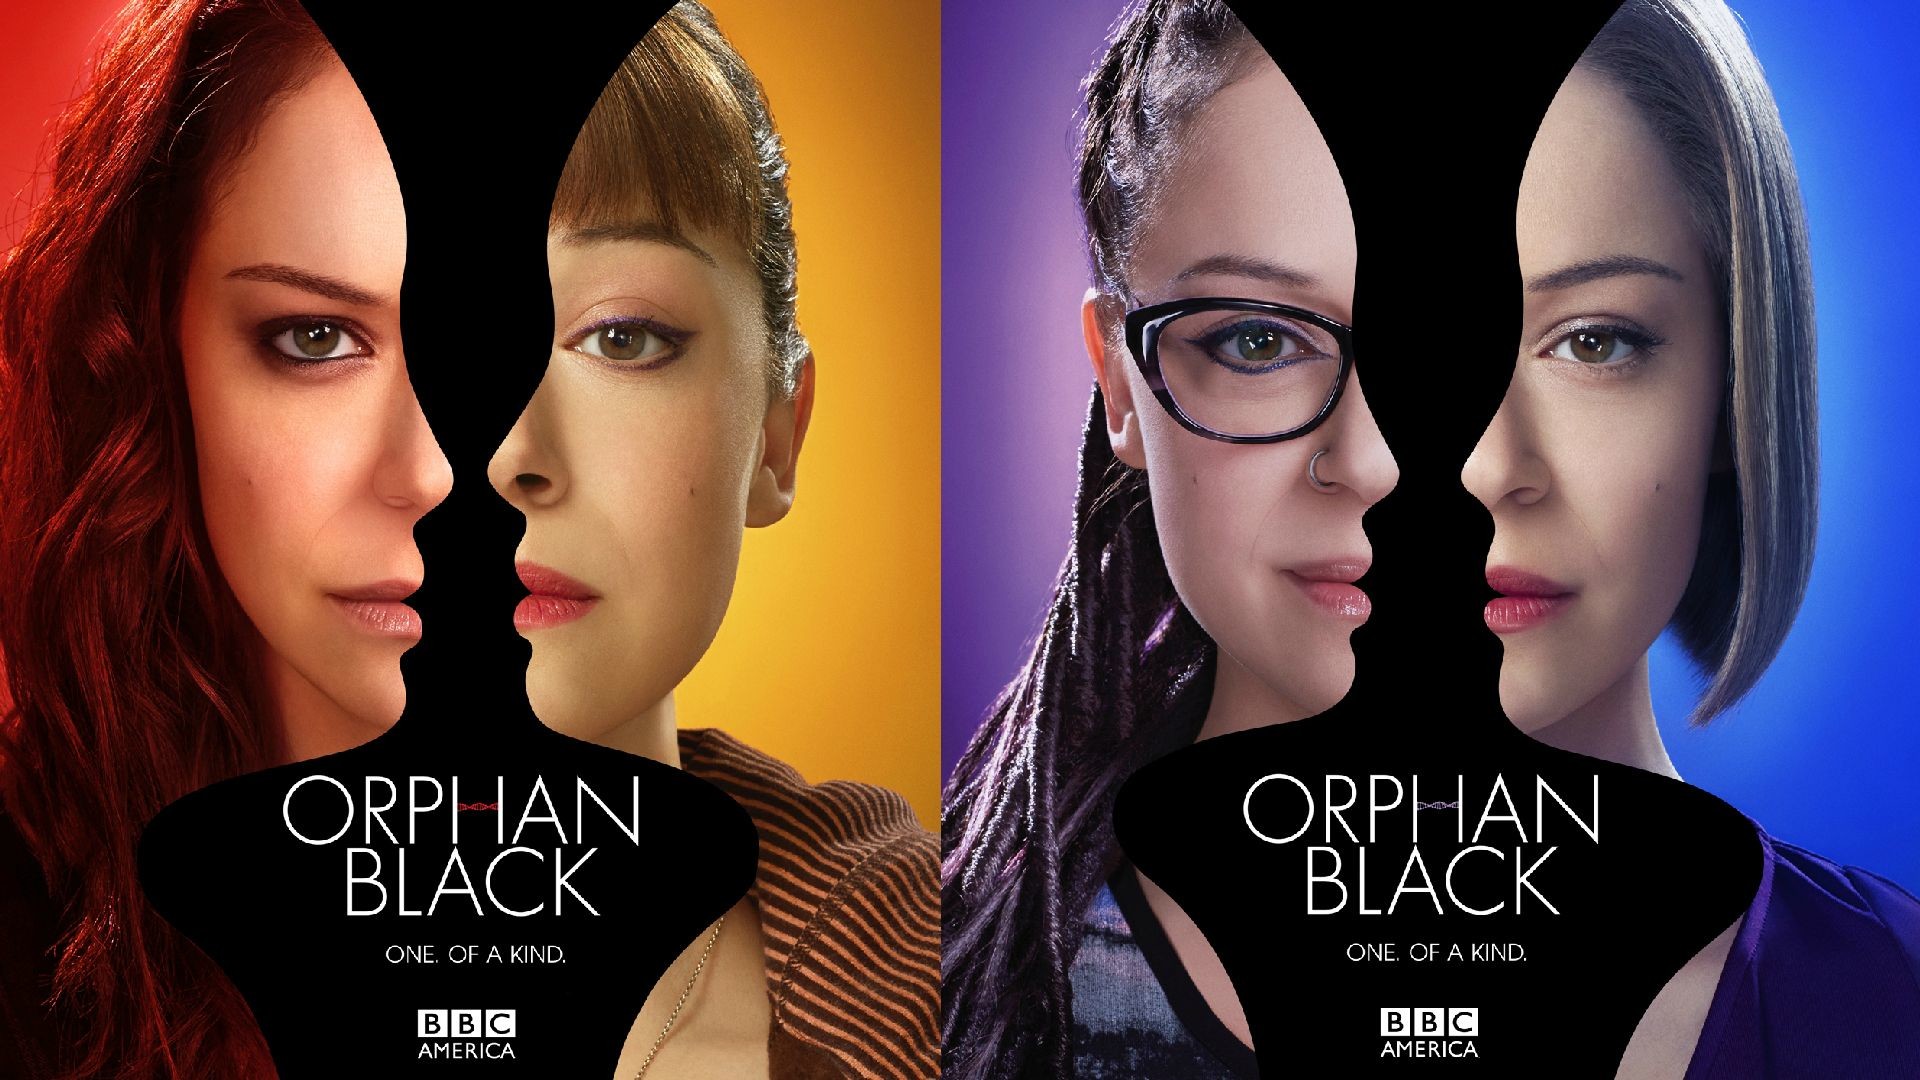 1920x1080 Orphan Black wallpapers. Anyone have some good ones? Here's the one I'm  currently using.